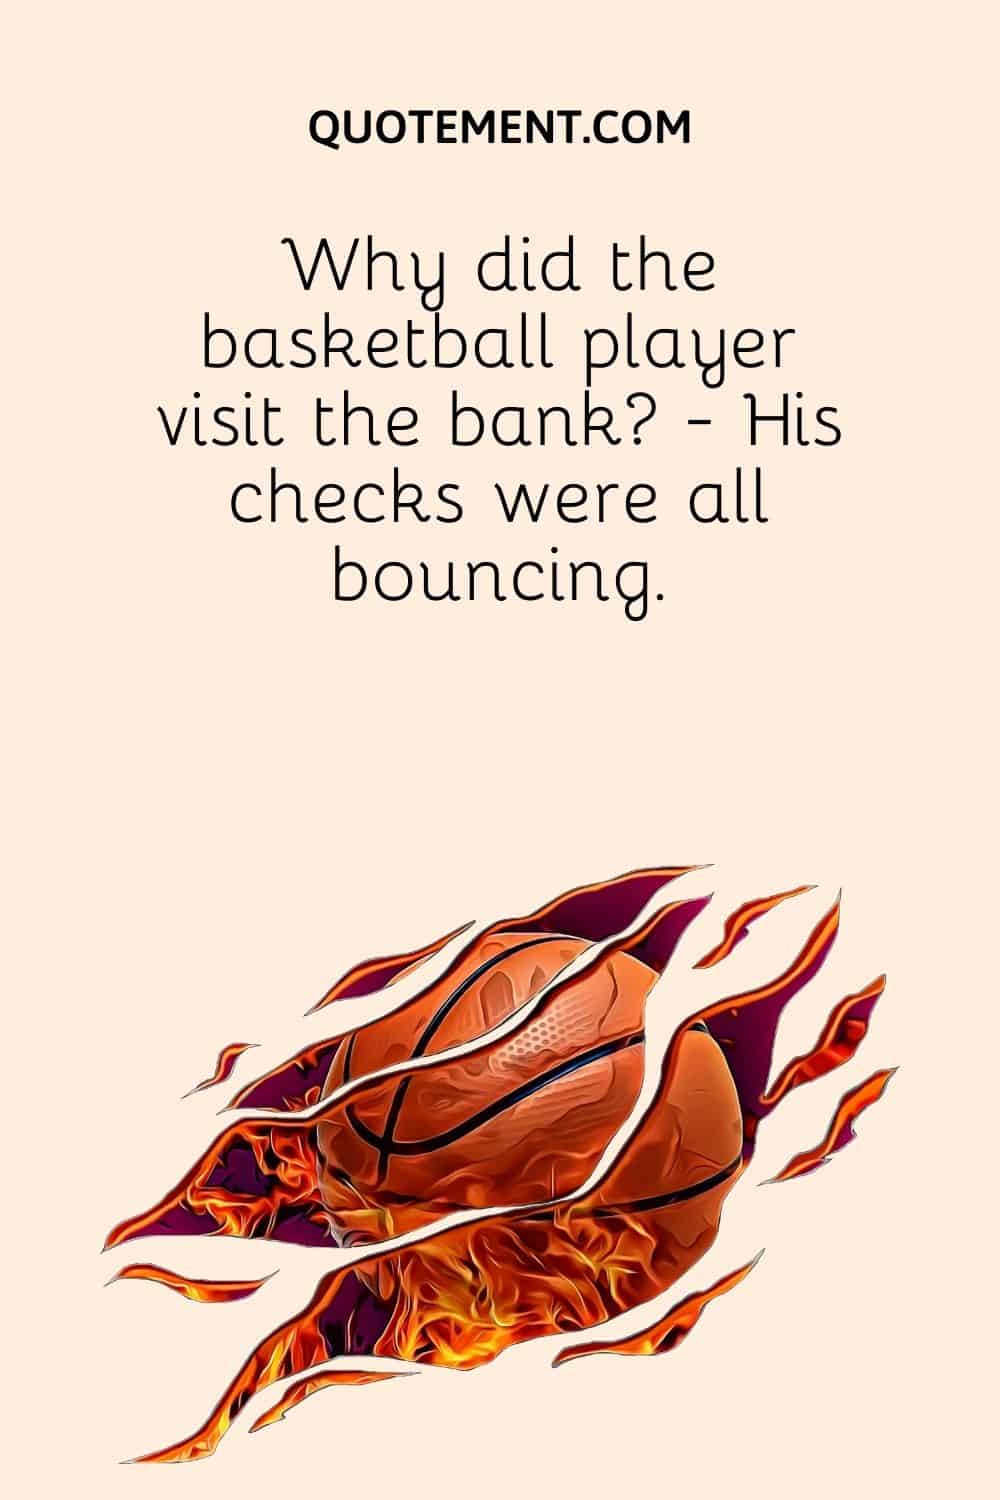 Why did the basketball player visit the bank